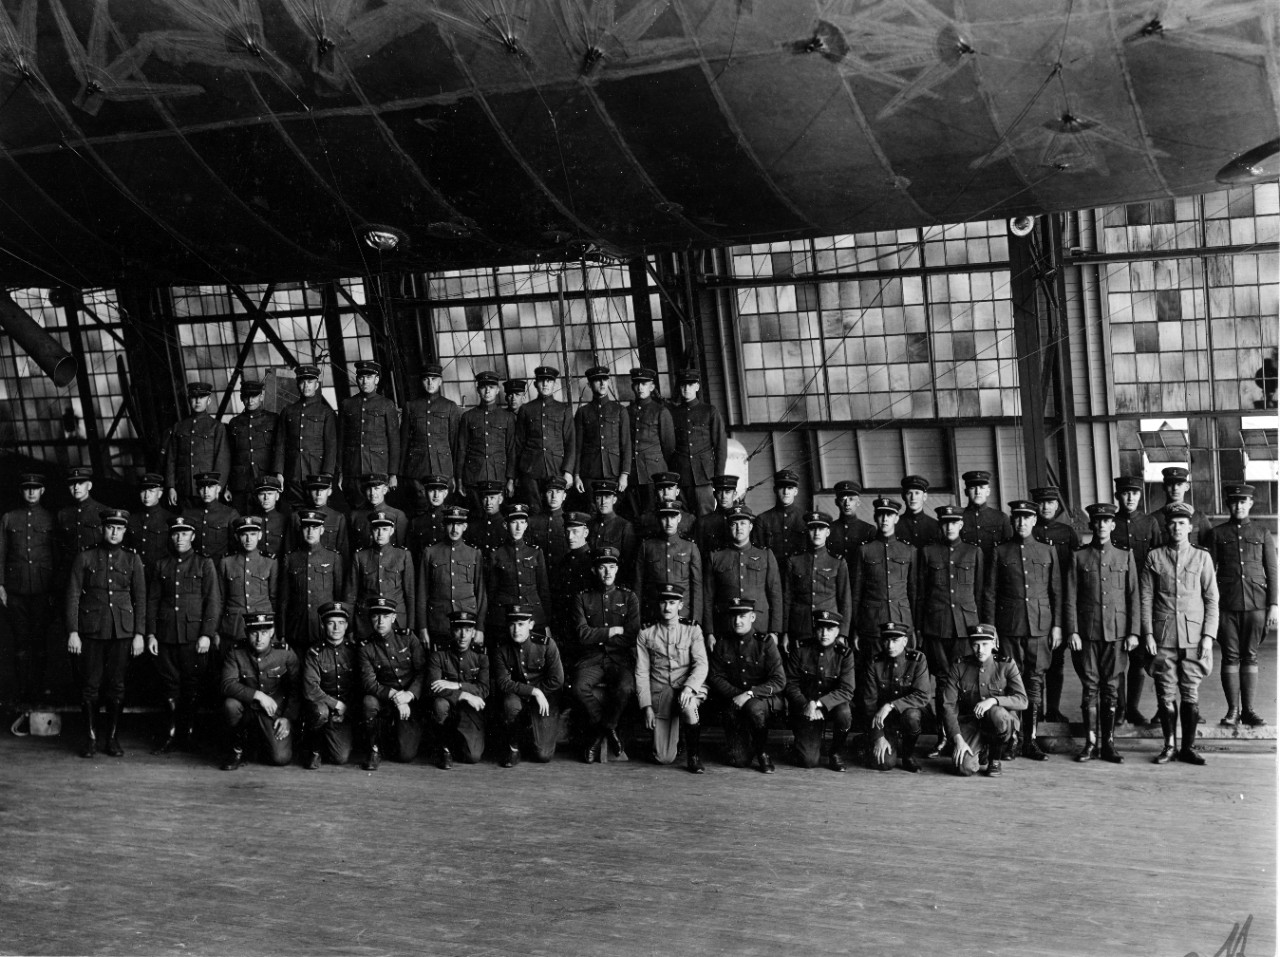 Blimp officers and students